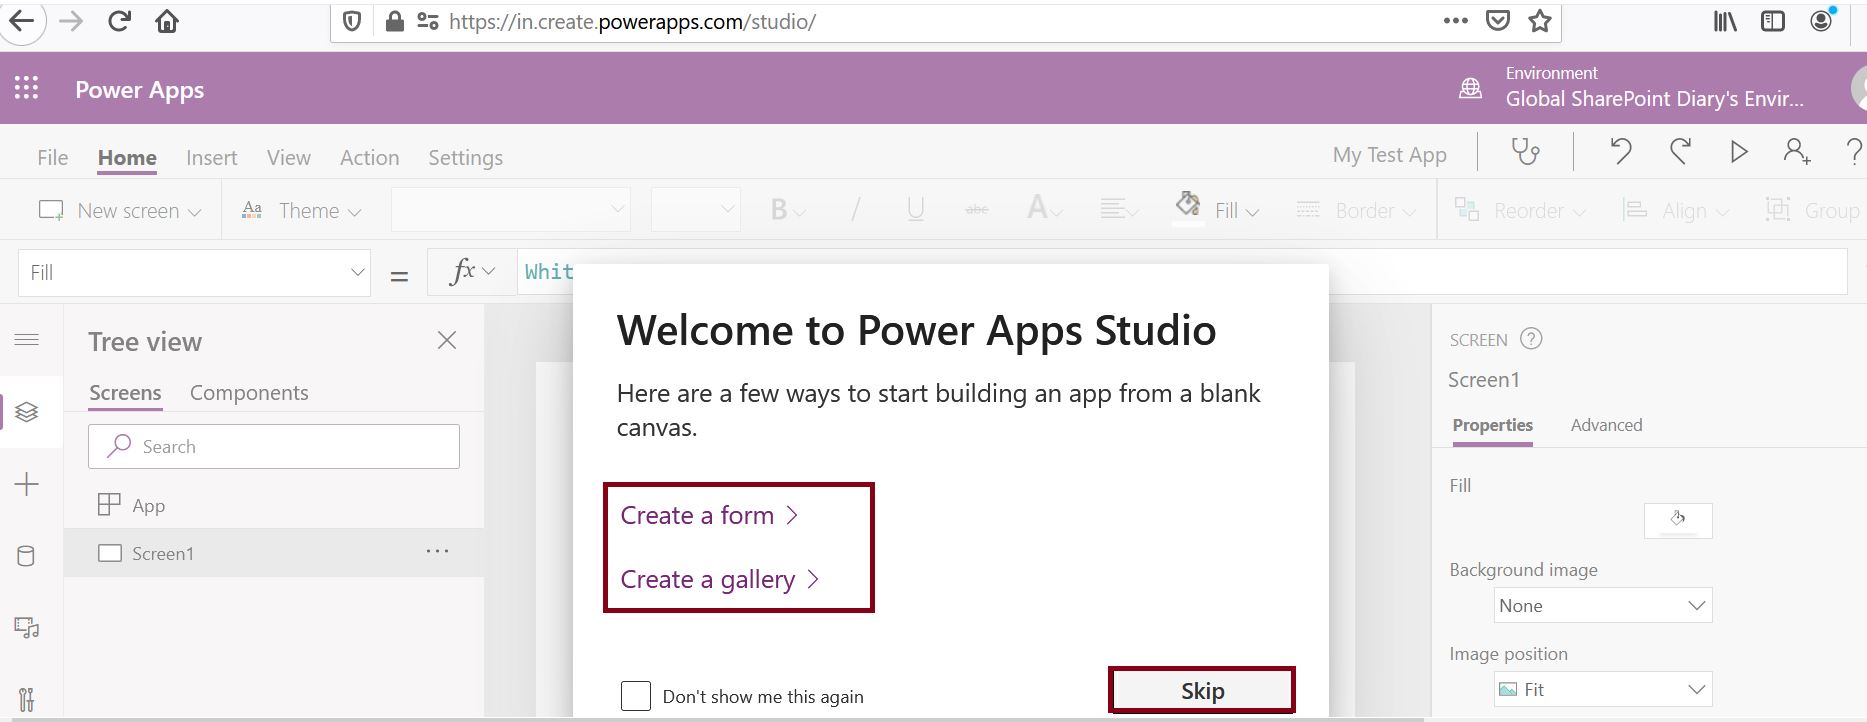 Welcome to Power Apps studio - Create Form